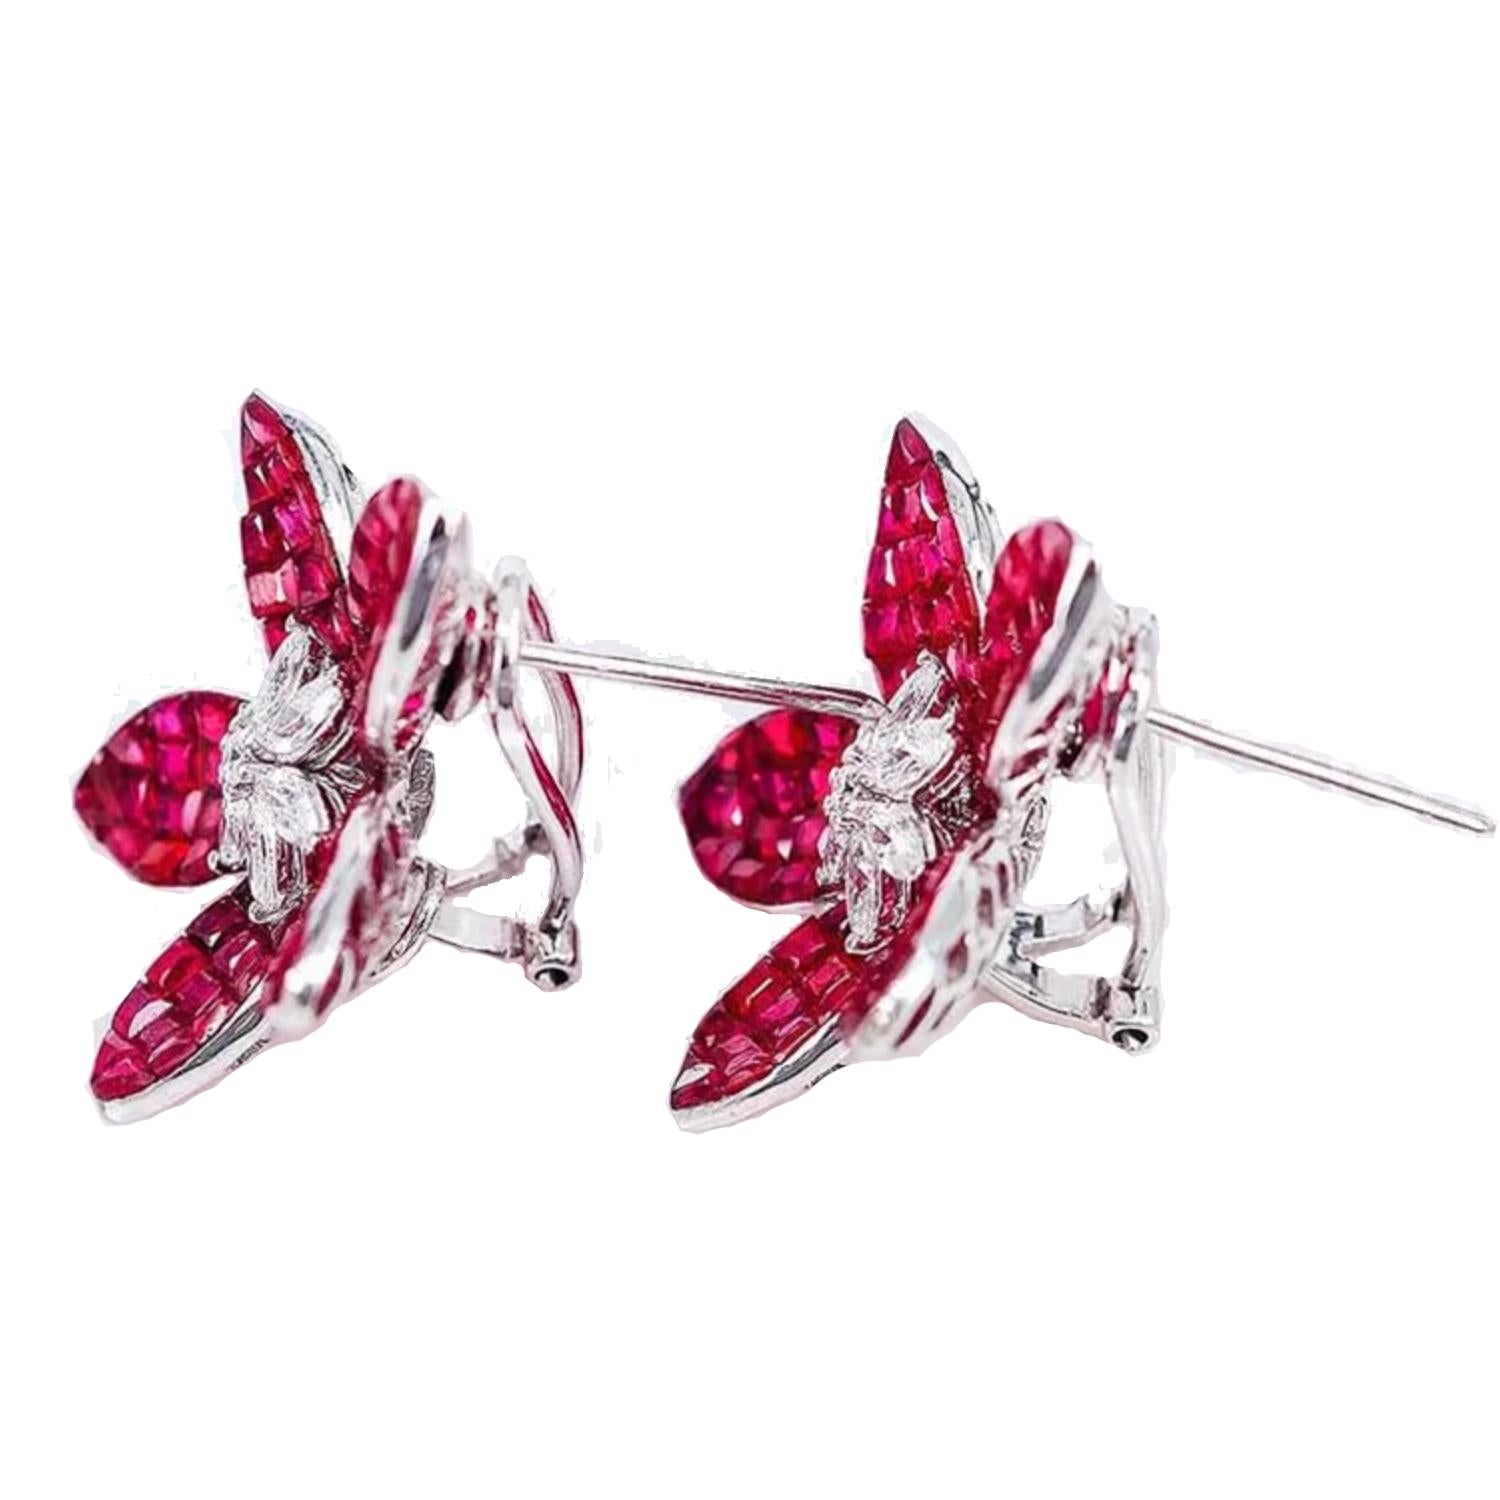 Invisibly-set ruby and diamond lotus flower earrings, designed with five calibre-cut ruby-set petals surrounding a cluster of marquise and round brilliant-cut diamonds at center. Handcrafted in polished 18k white gold.

Rubies weighing 23.50 total